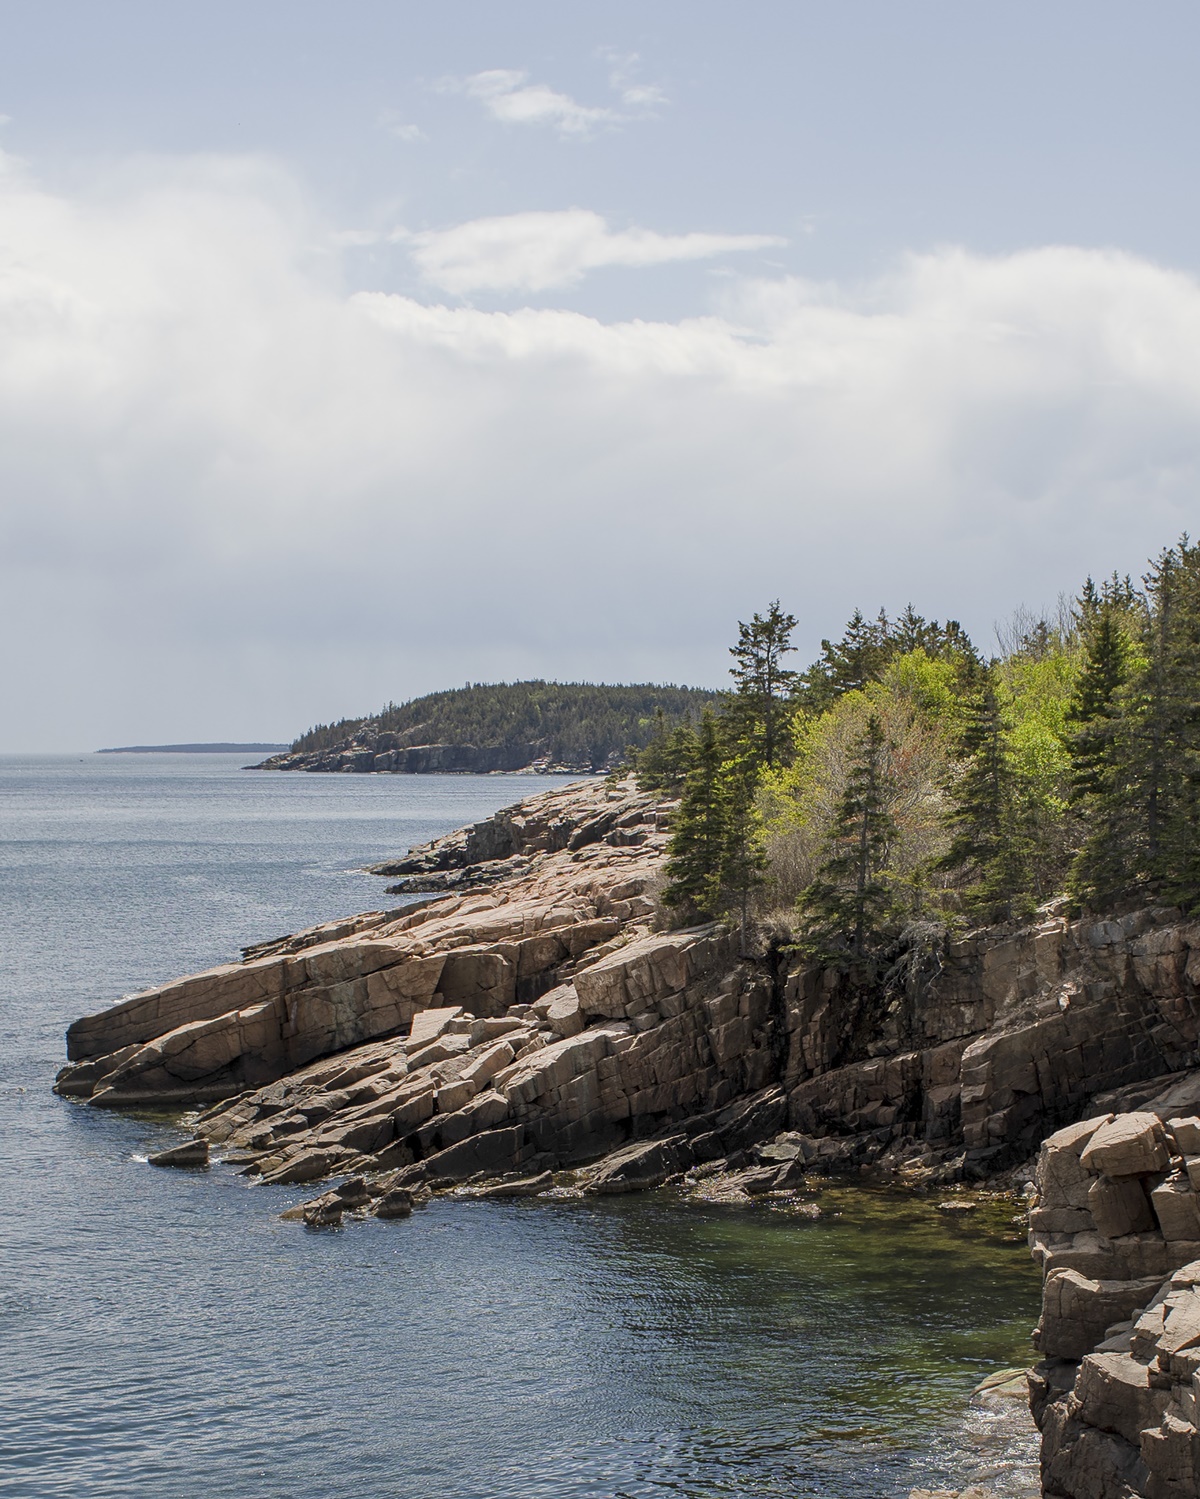 Acadia National Park in Maine, May 14, 2021. (John Tully/The New York Times)